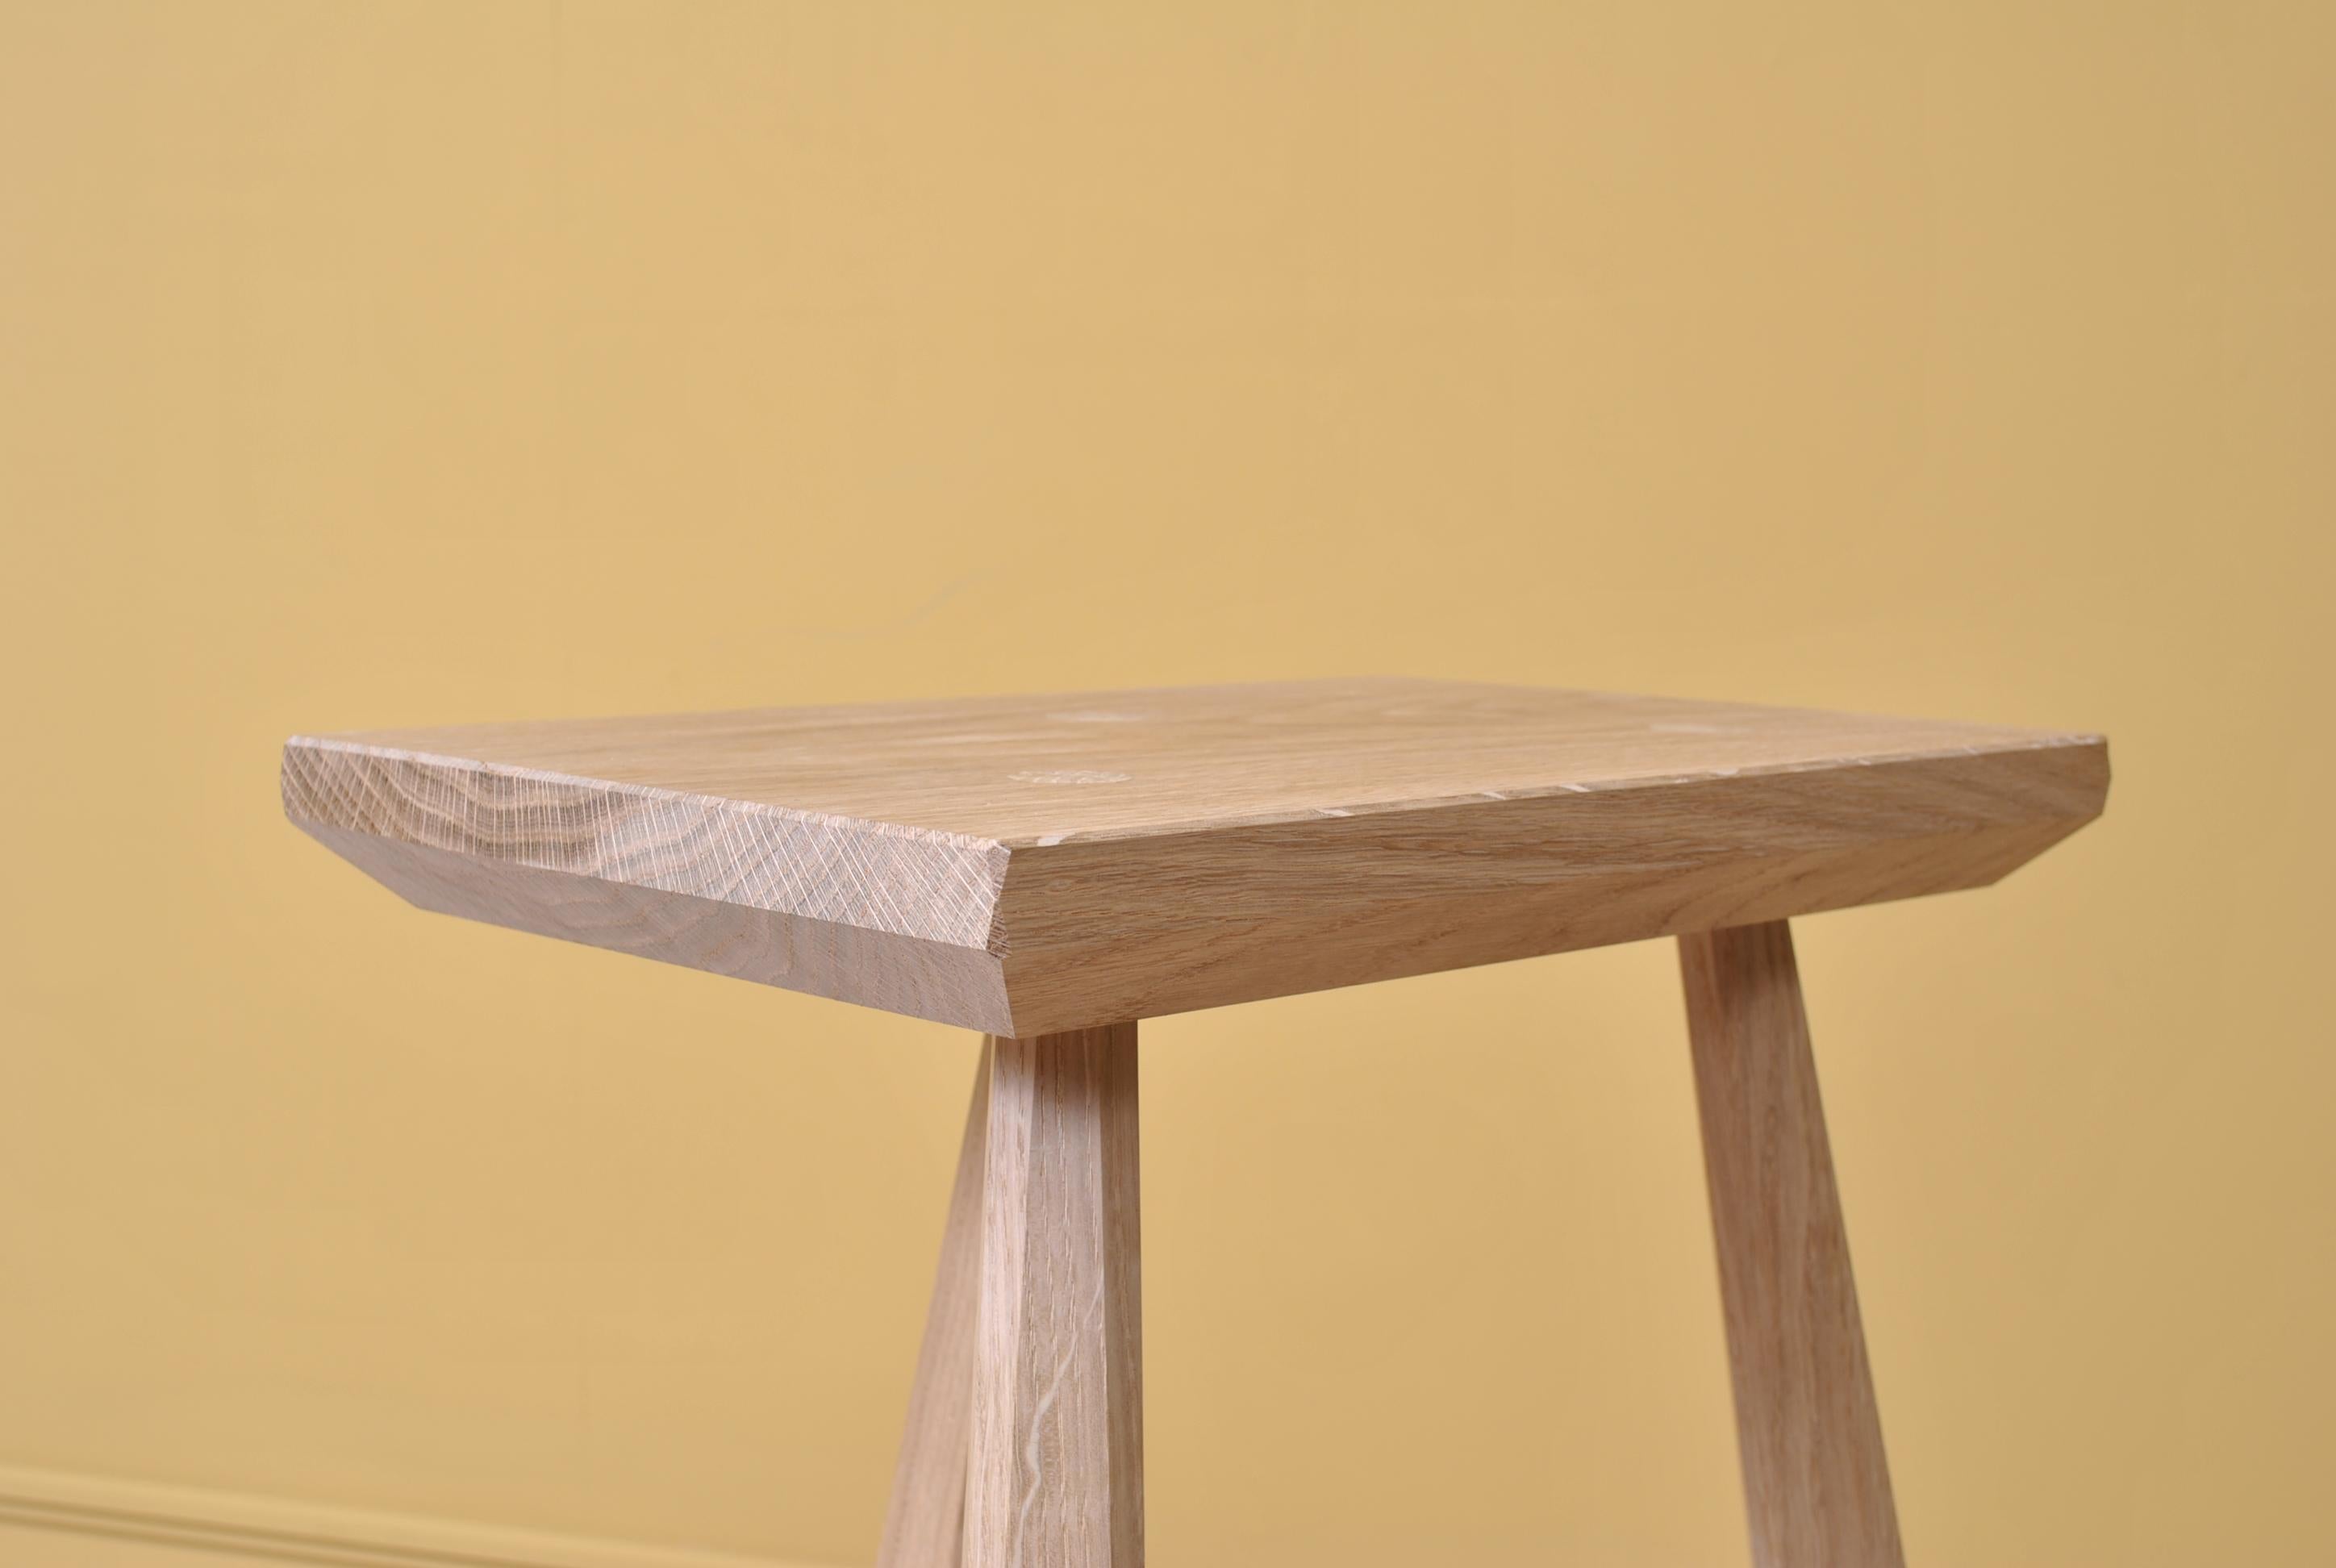 A handmade traditional staked legged milking stool by Bibbings & Hensby. This example is in raw oak but other timbers and finishes are available.
Much of Bibbings & Hensby’s work is characterized by their predominant use of hand tools. This hands on